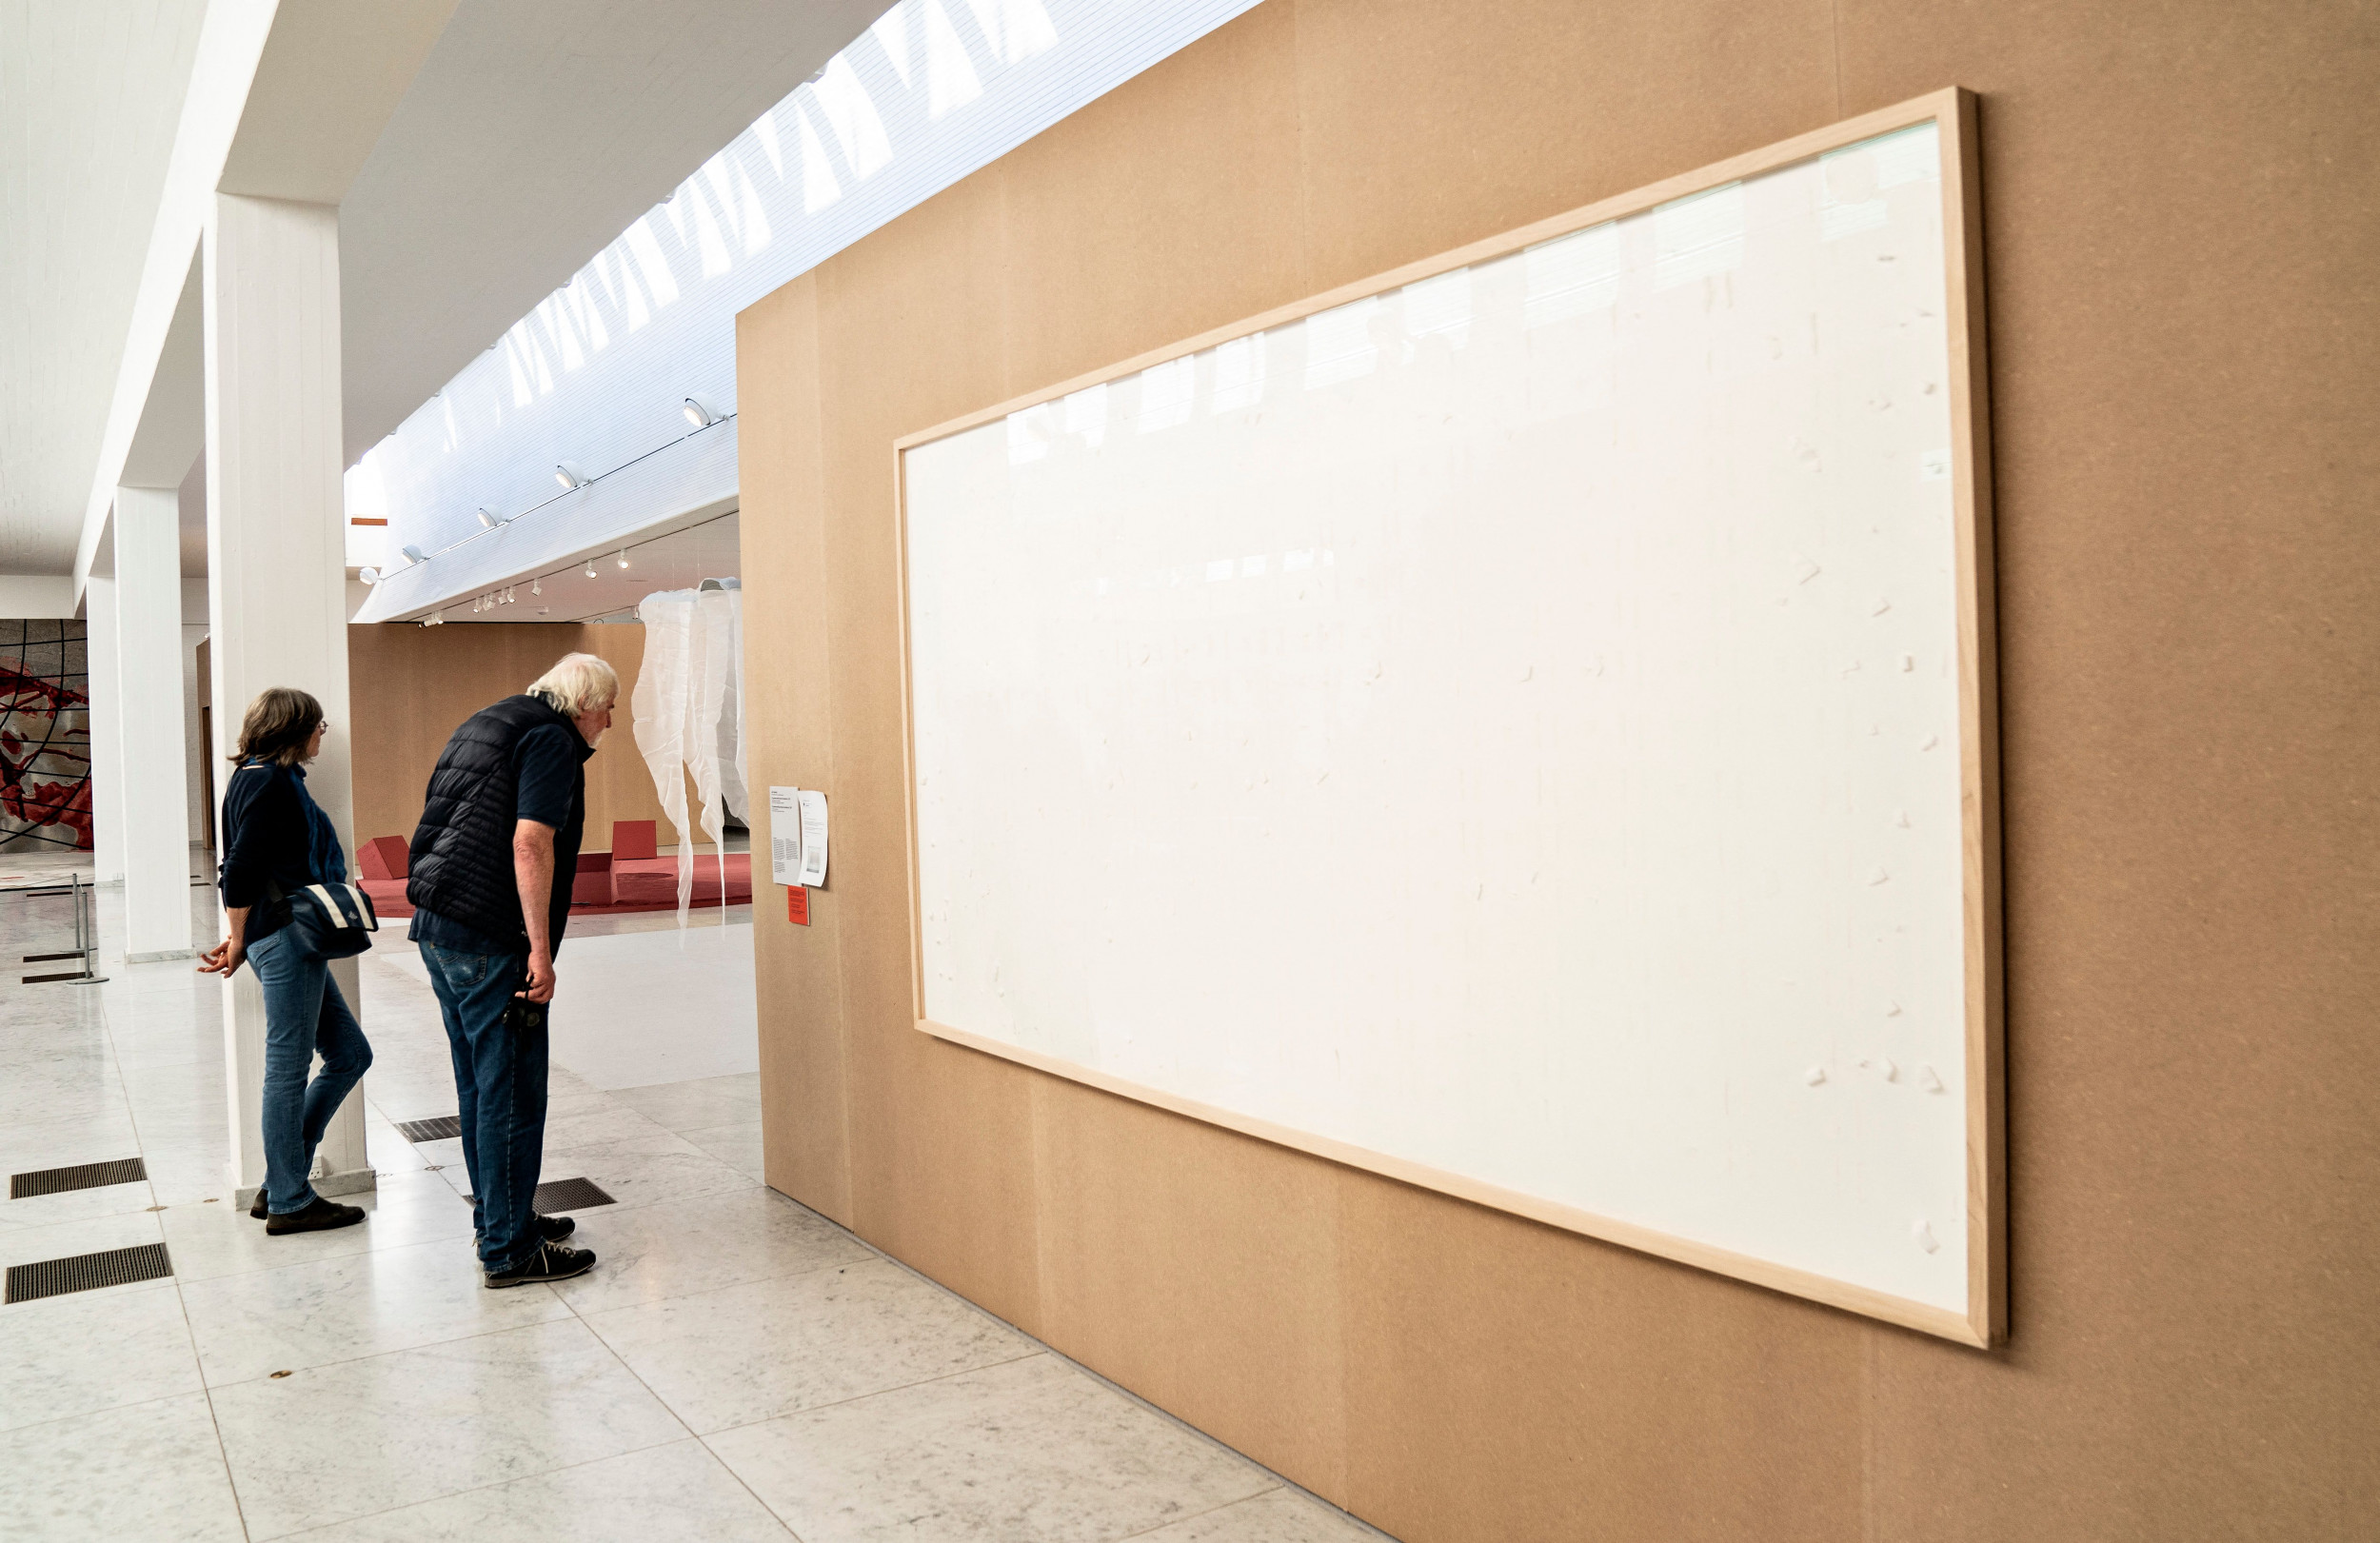 Artist Turns in Blank Canvases Titled 'Take the Money and Run